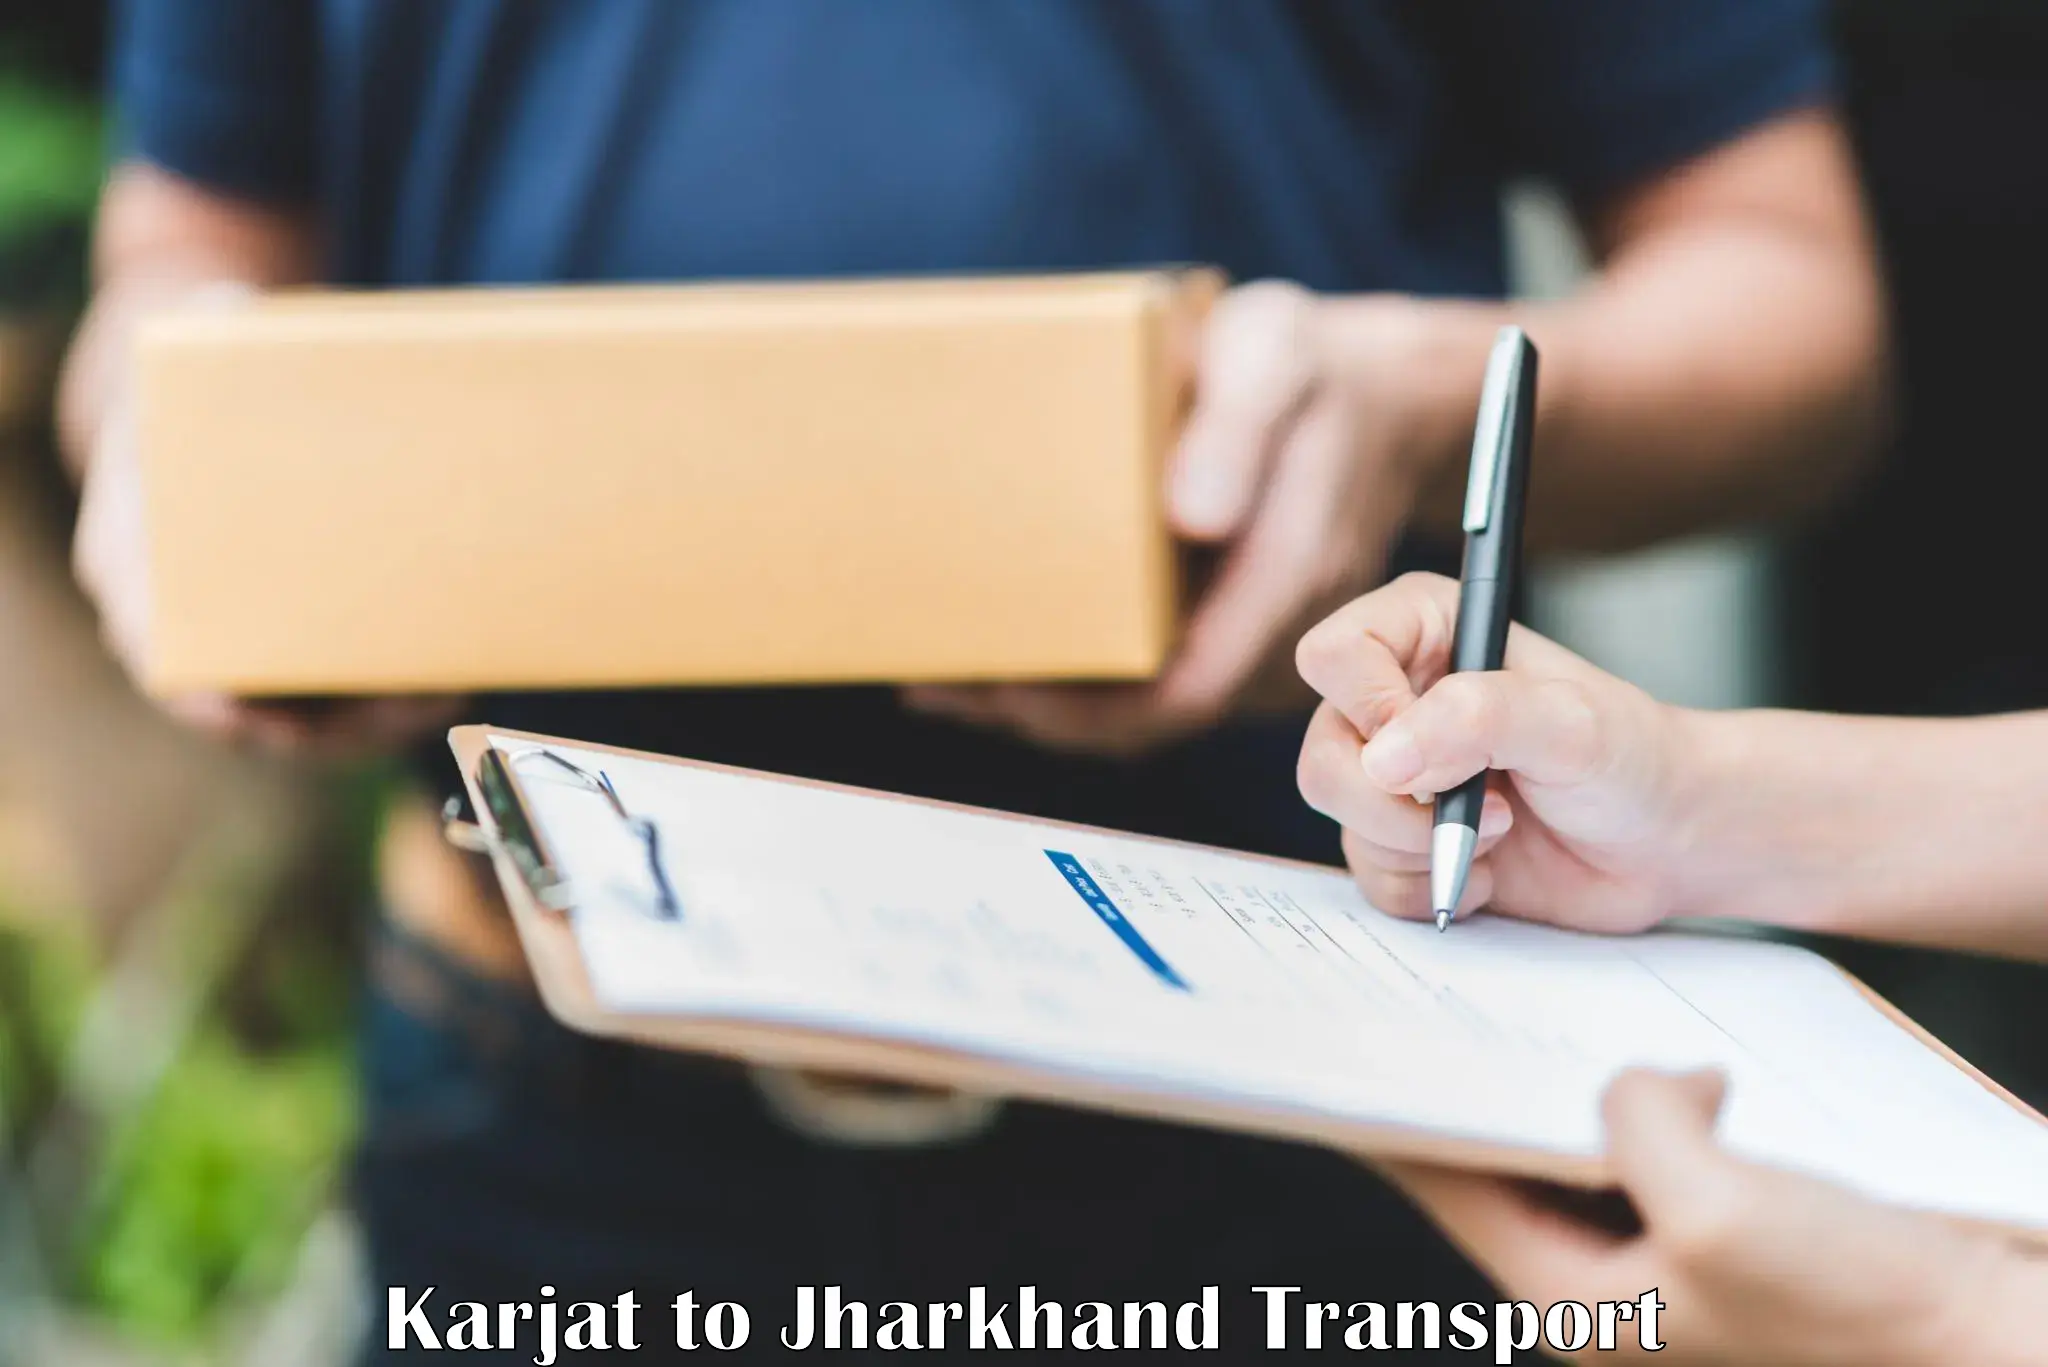 Furniture transport service in Karjat to Jharkhand